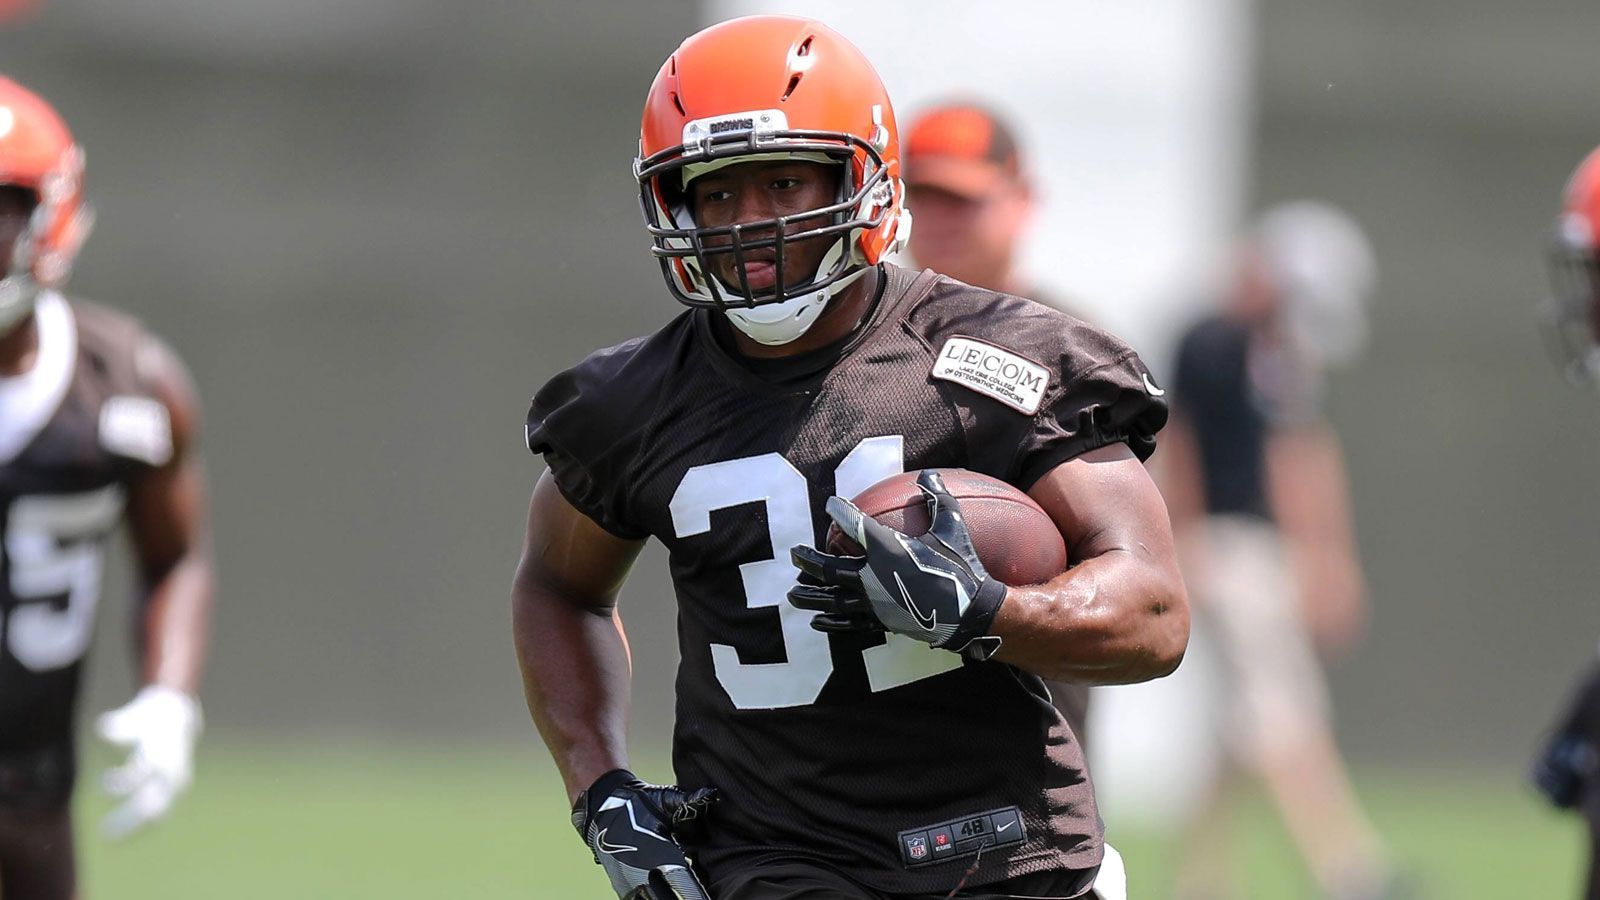 
                <strong>Die Top 5 Running Backs in Madden 19</strong><br>
                Platz 5: Nick Chubb, Cleveland Browns: 76
              